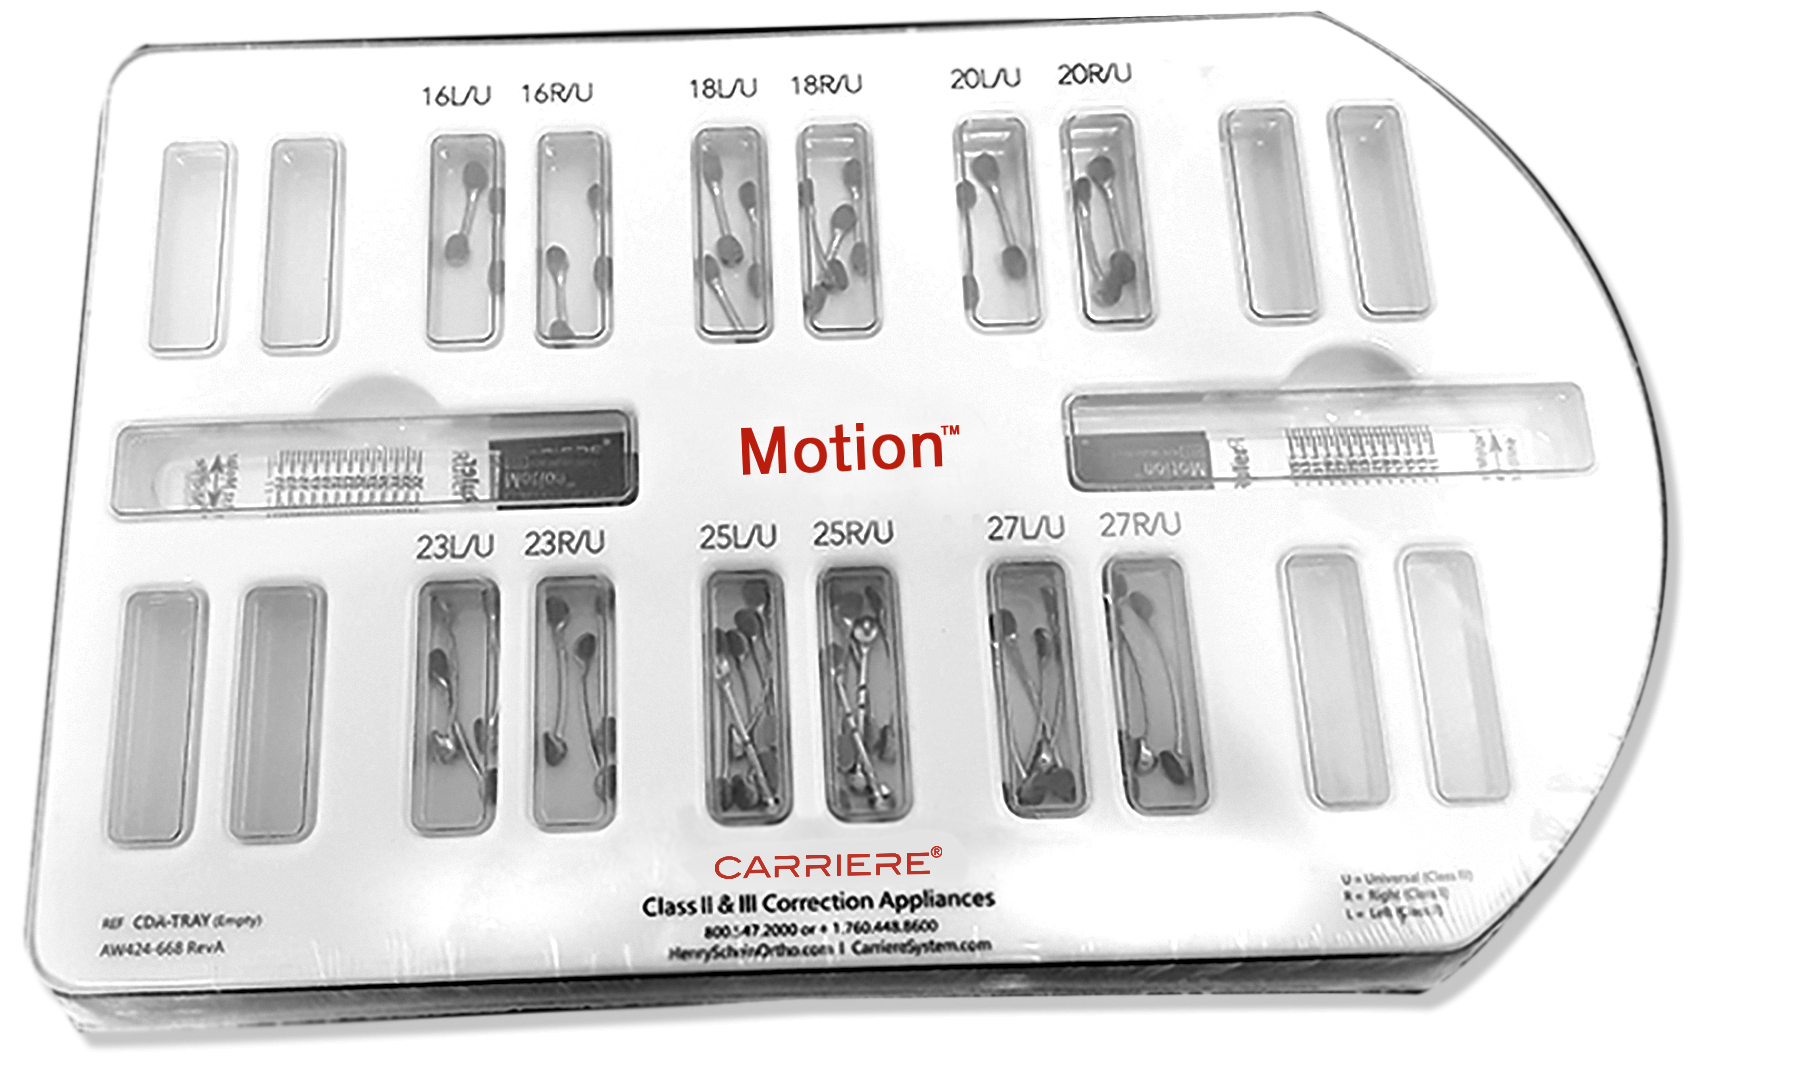 CARRIERE MOTION II CLEAR "JUMP START" KIT (20 SETS)  